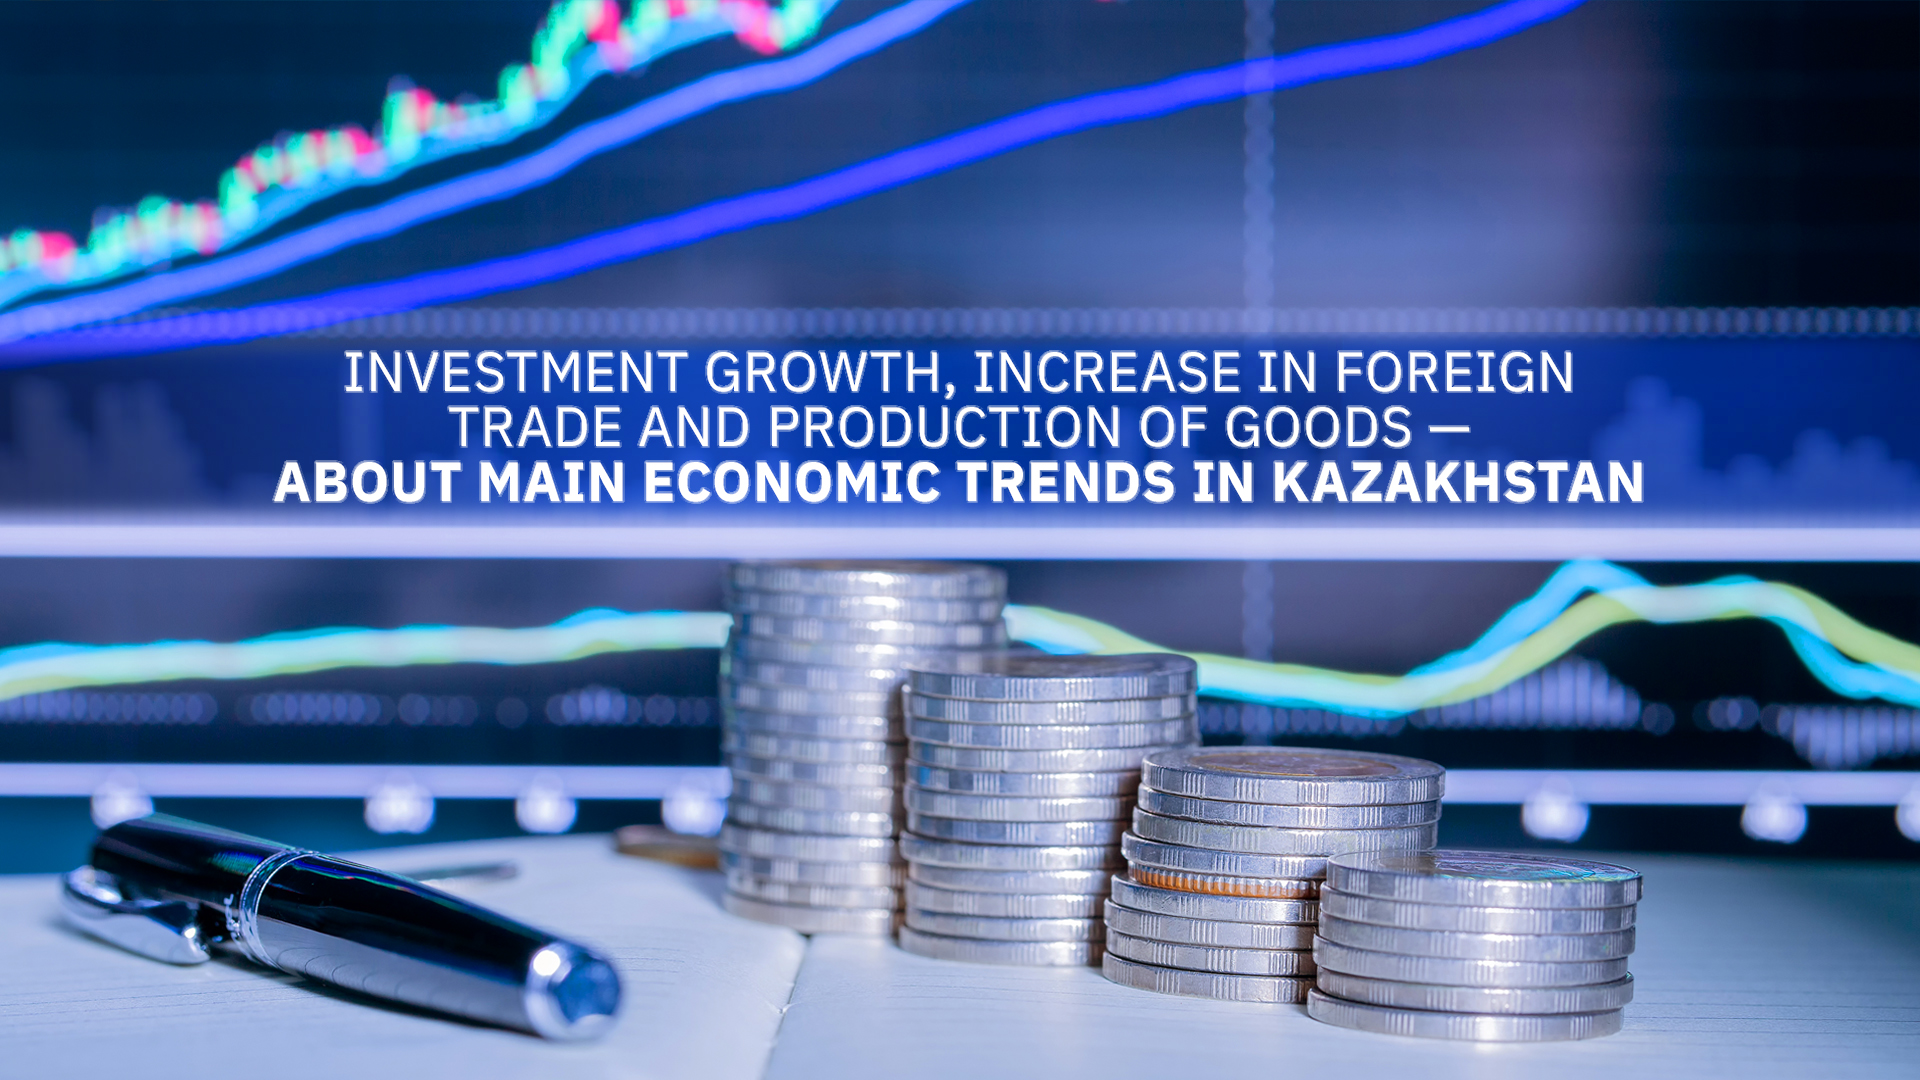 Investment growth, increase in foreign trade and production of goods — about main economic trends in Kazakhstan